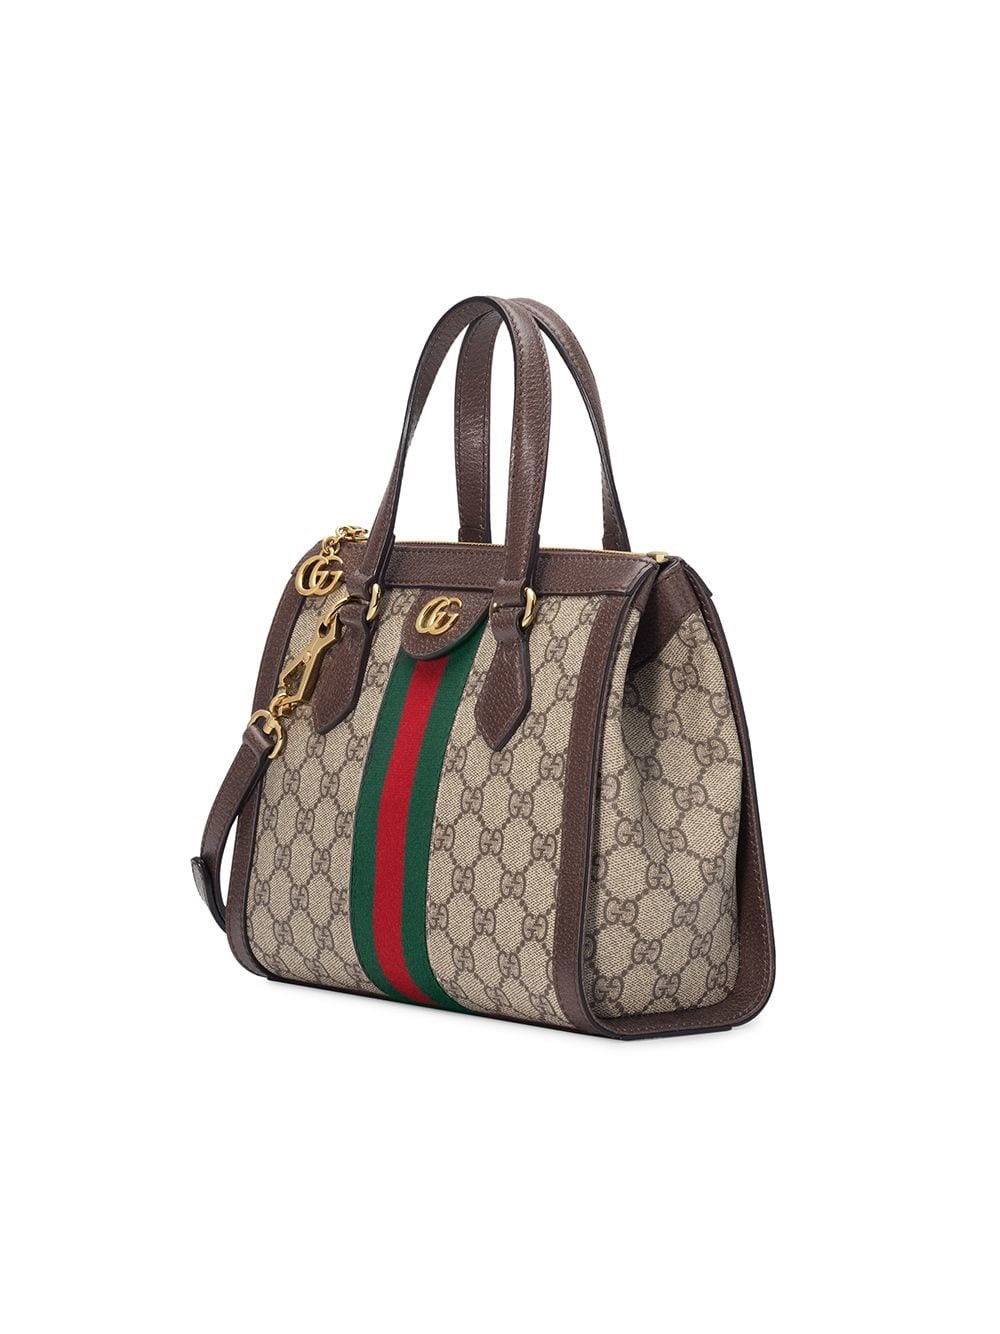 gucci OPHIDIA BAG available on wcy.wat.edu.pl - 26967